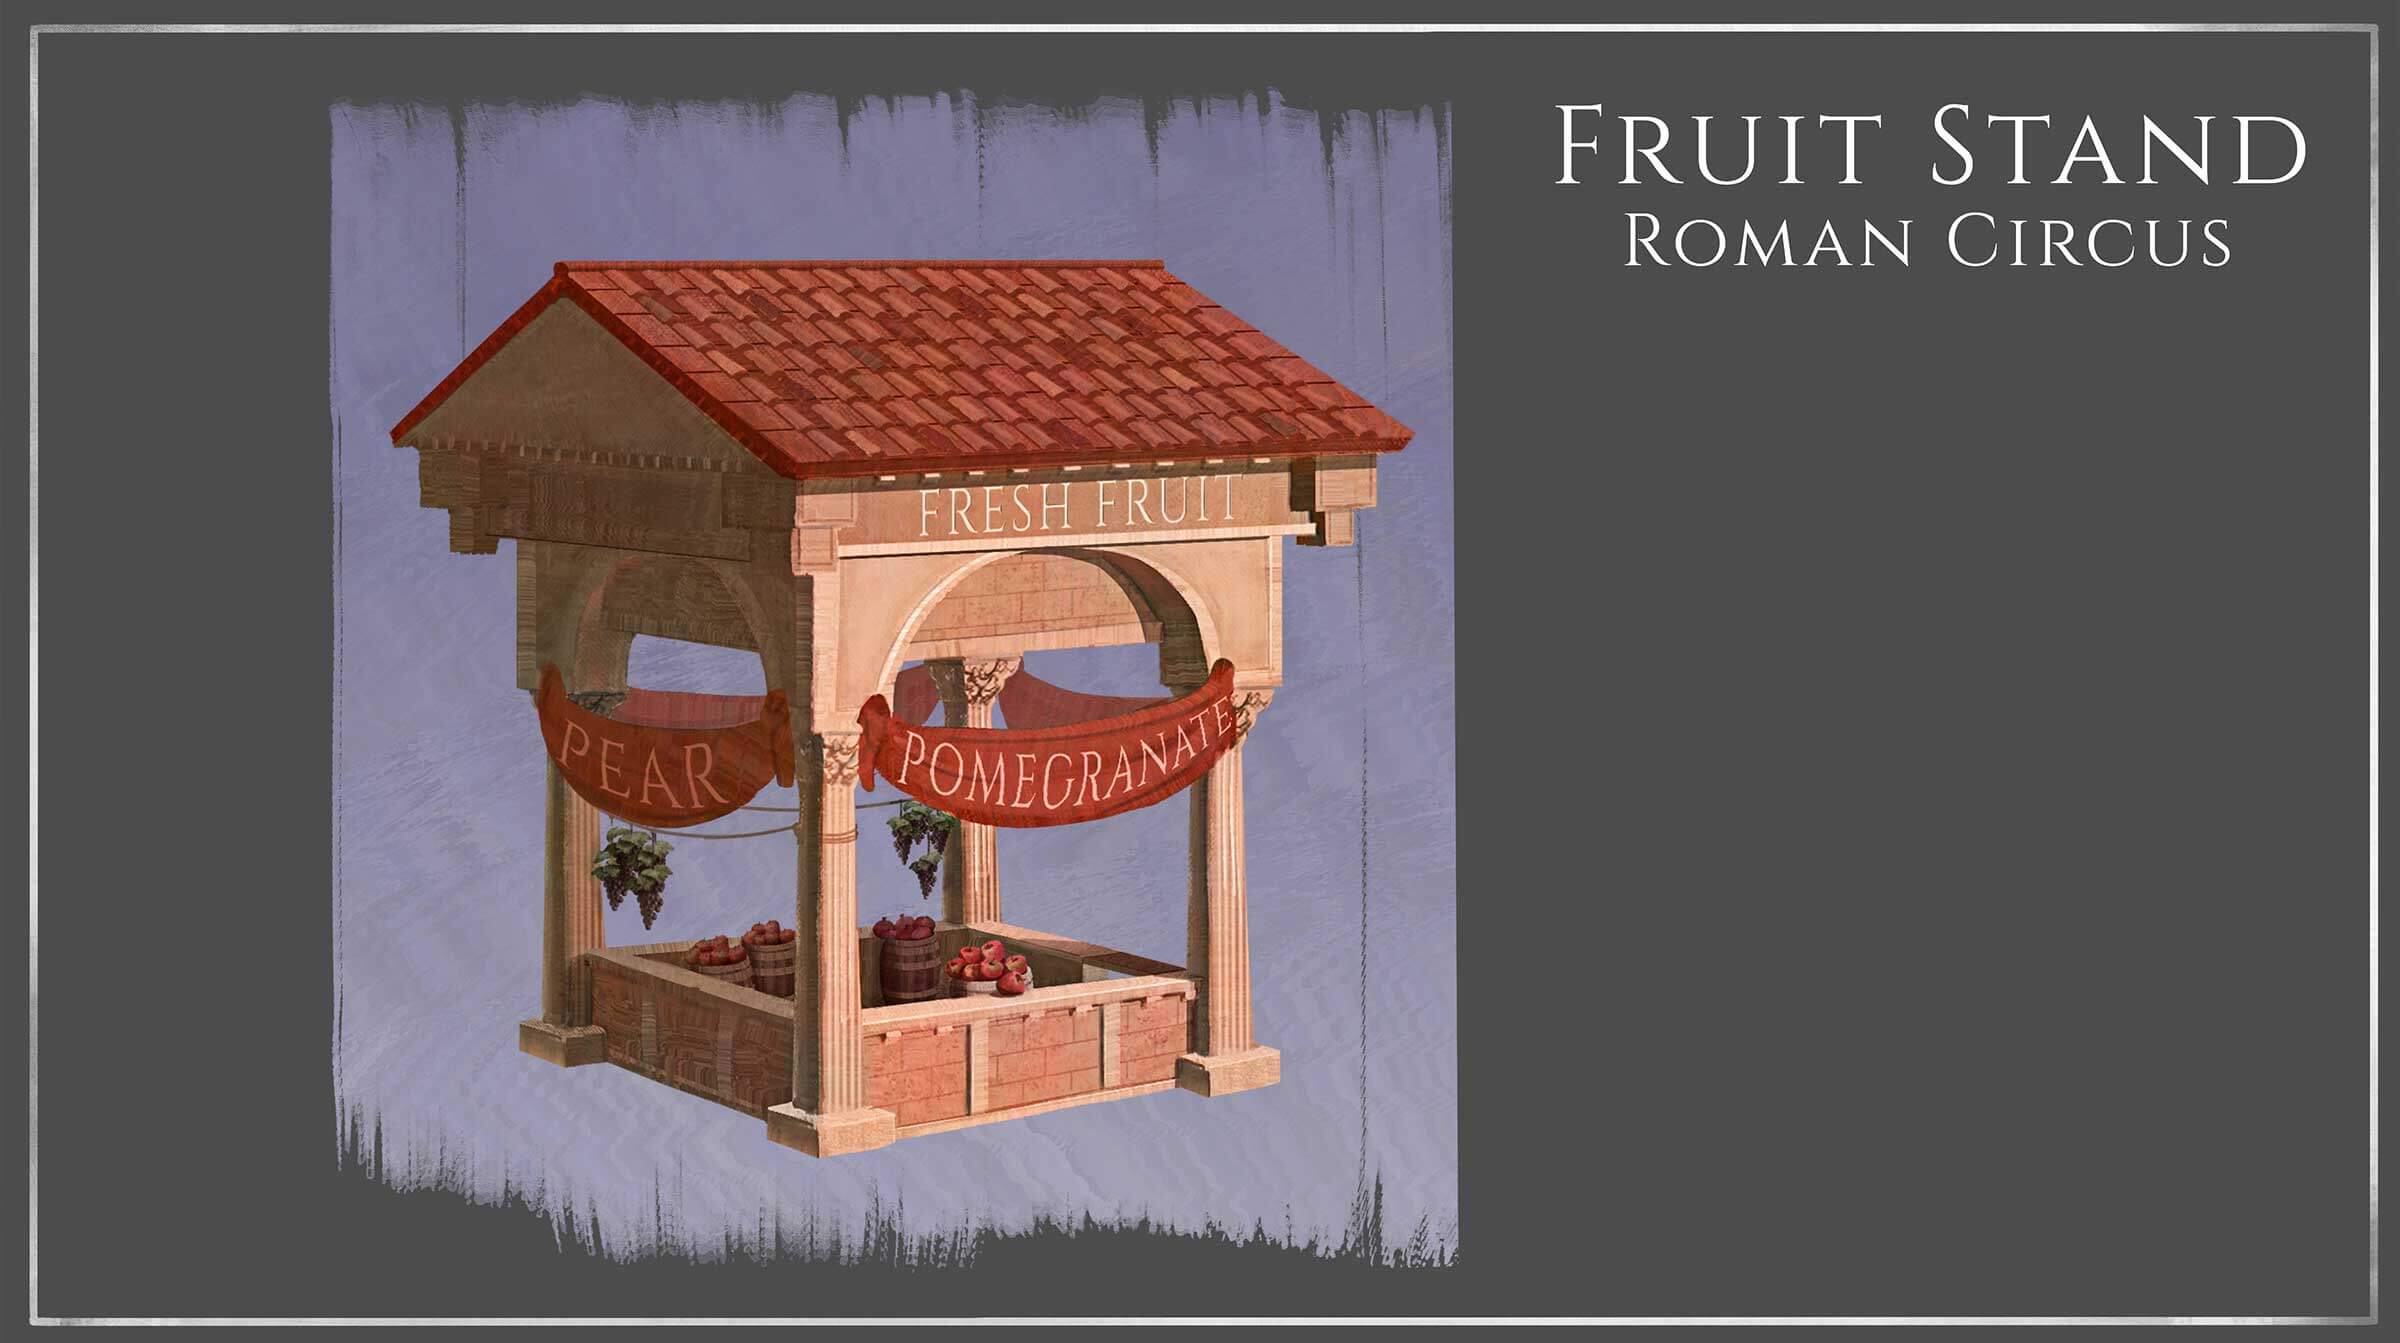 A fruit stand with Roman architecture.